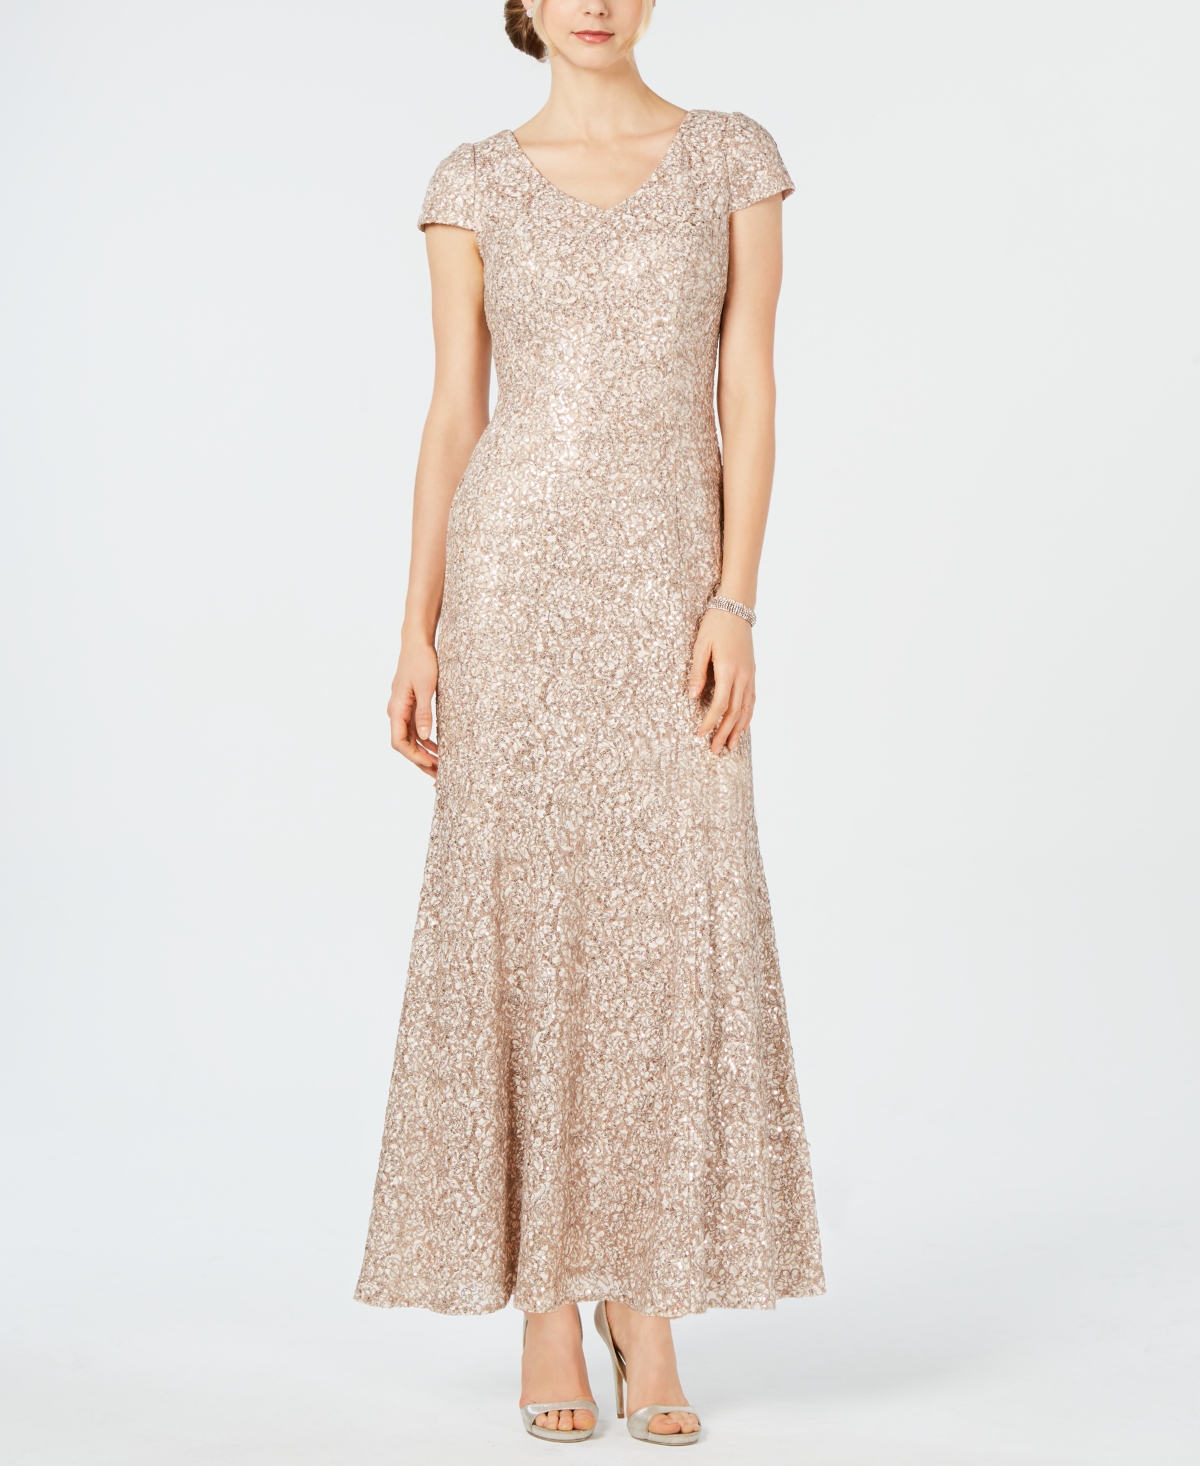 Petite Lace Cap-Sleeve Gown - Champagne Ivory